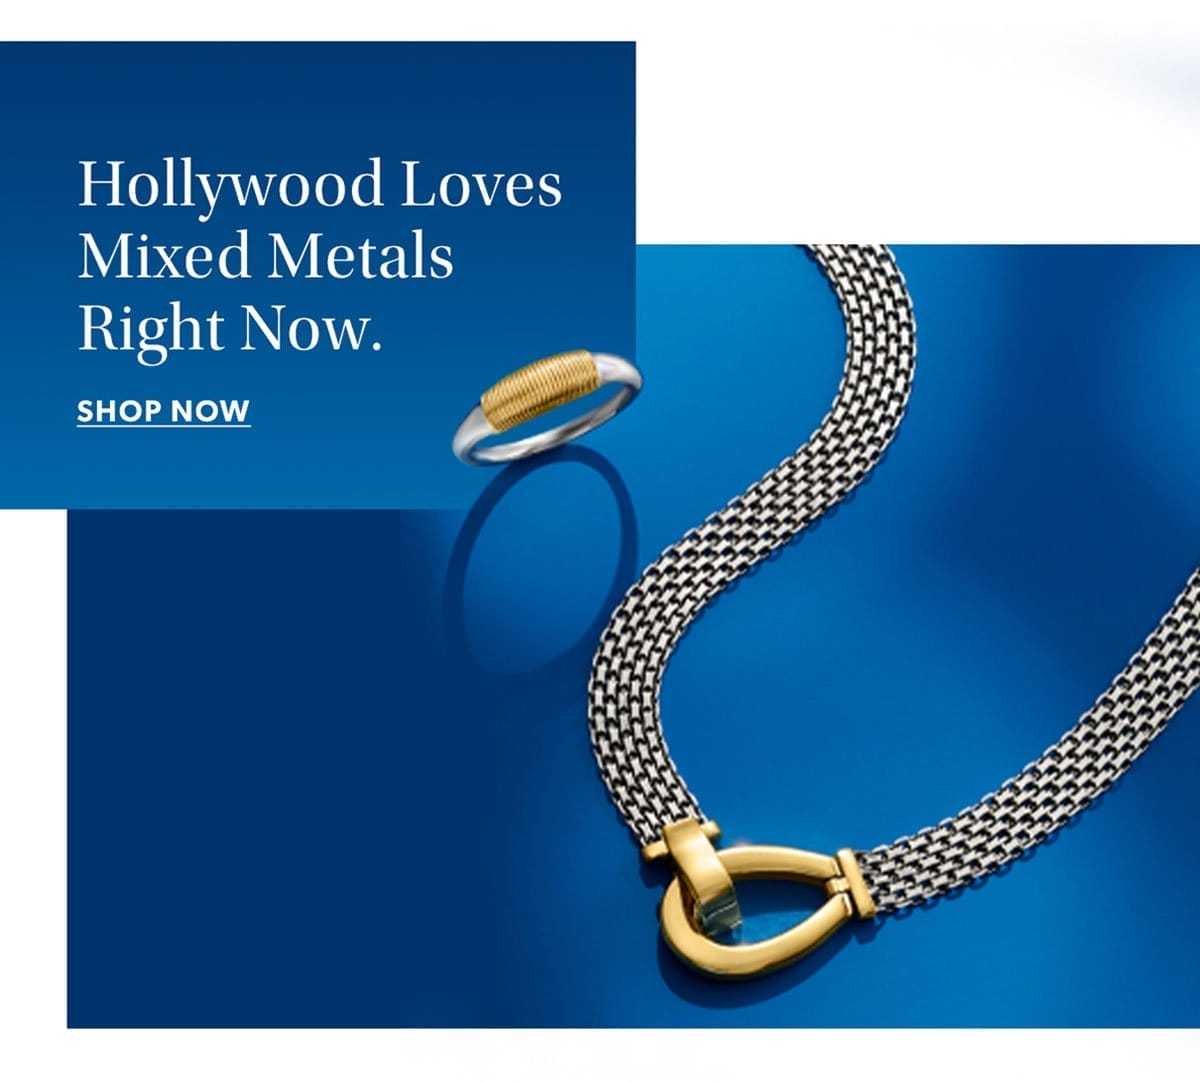 Hollywood Loves Mixed Metals Right Now. Shop Now